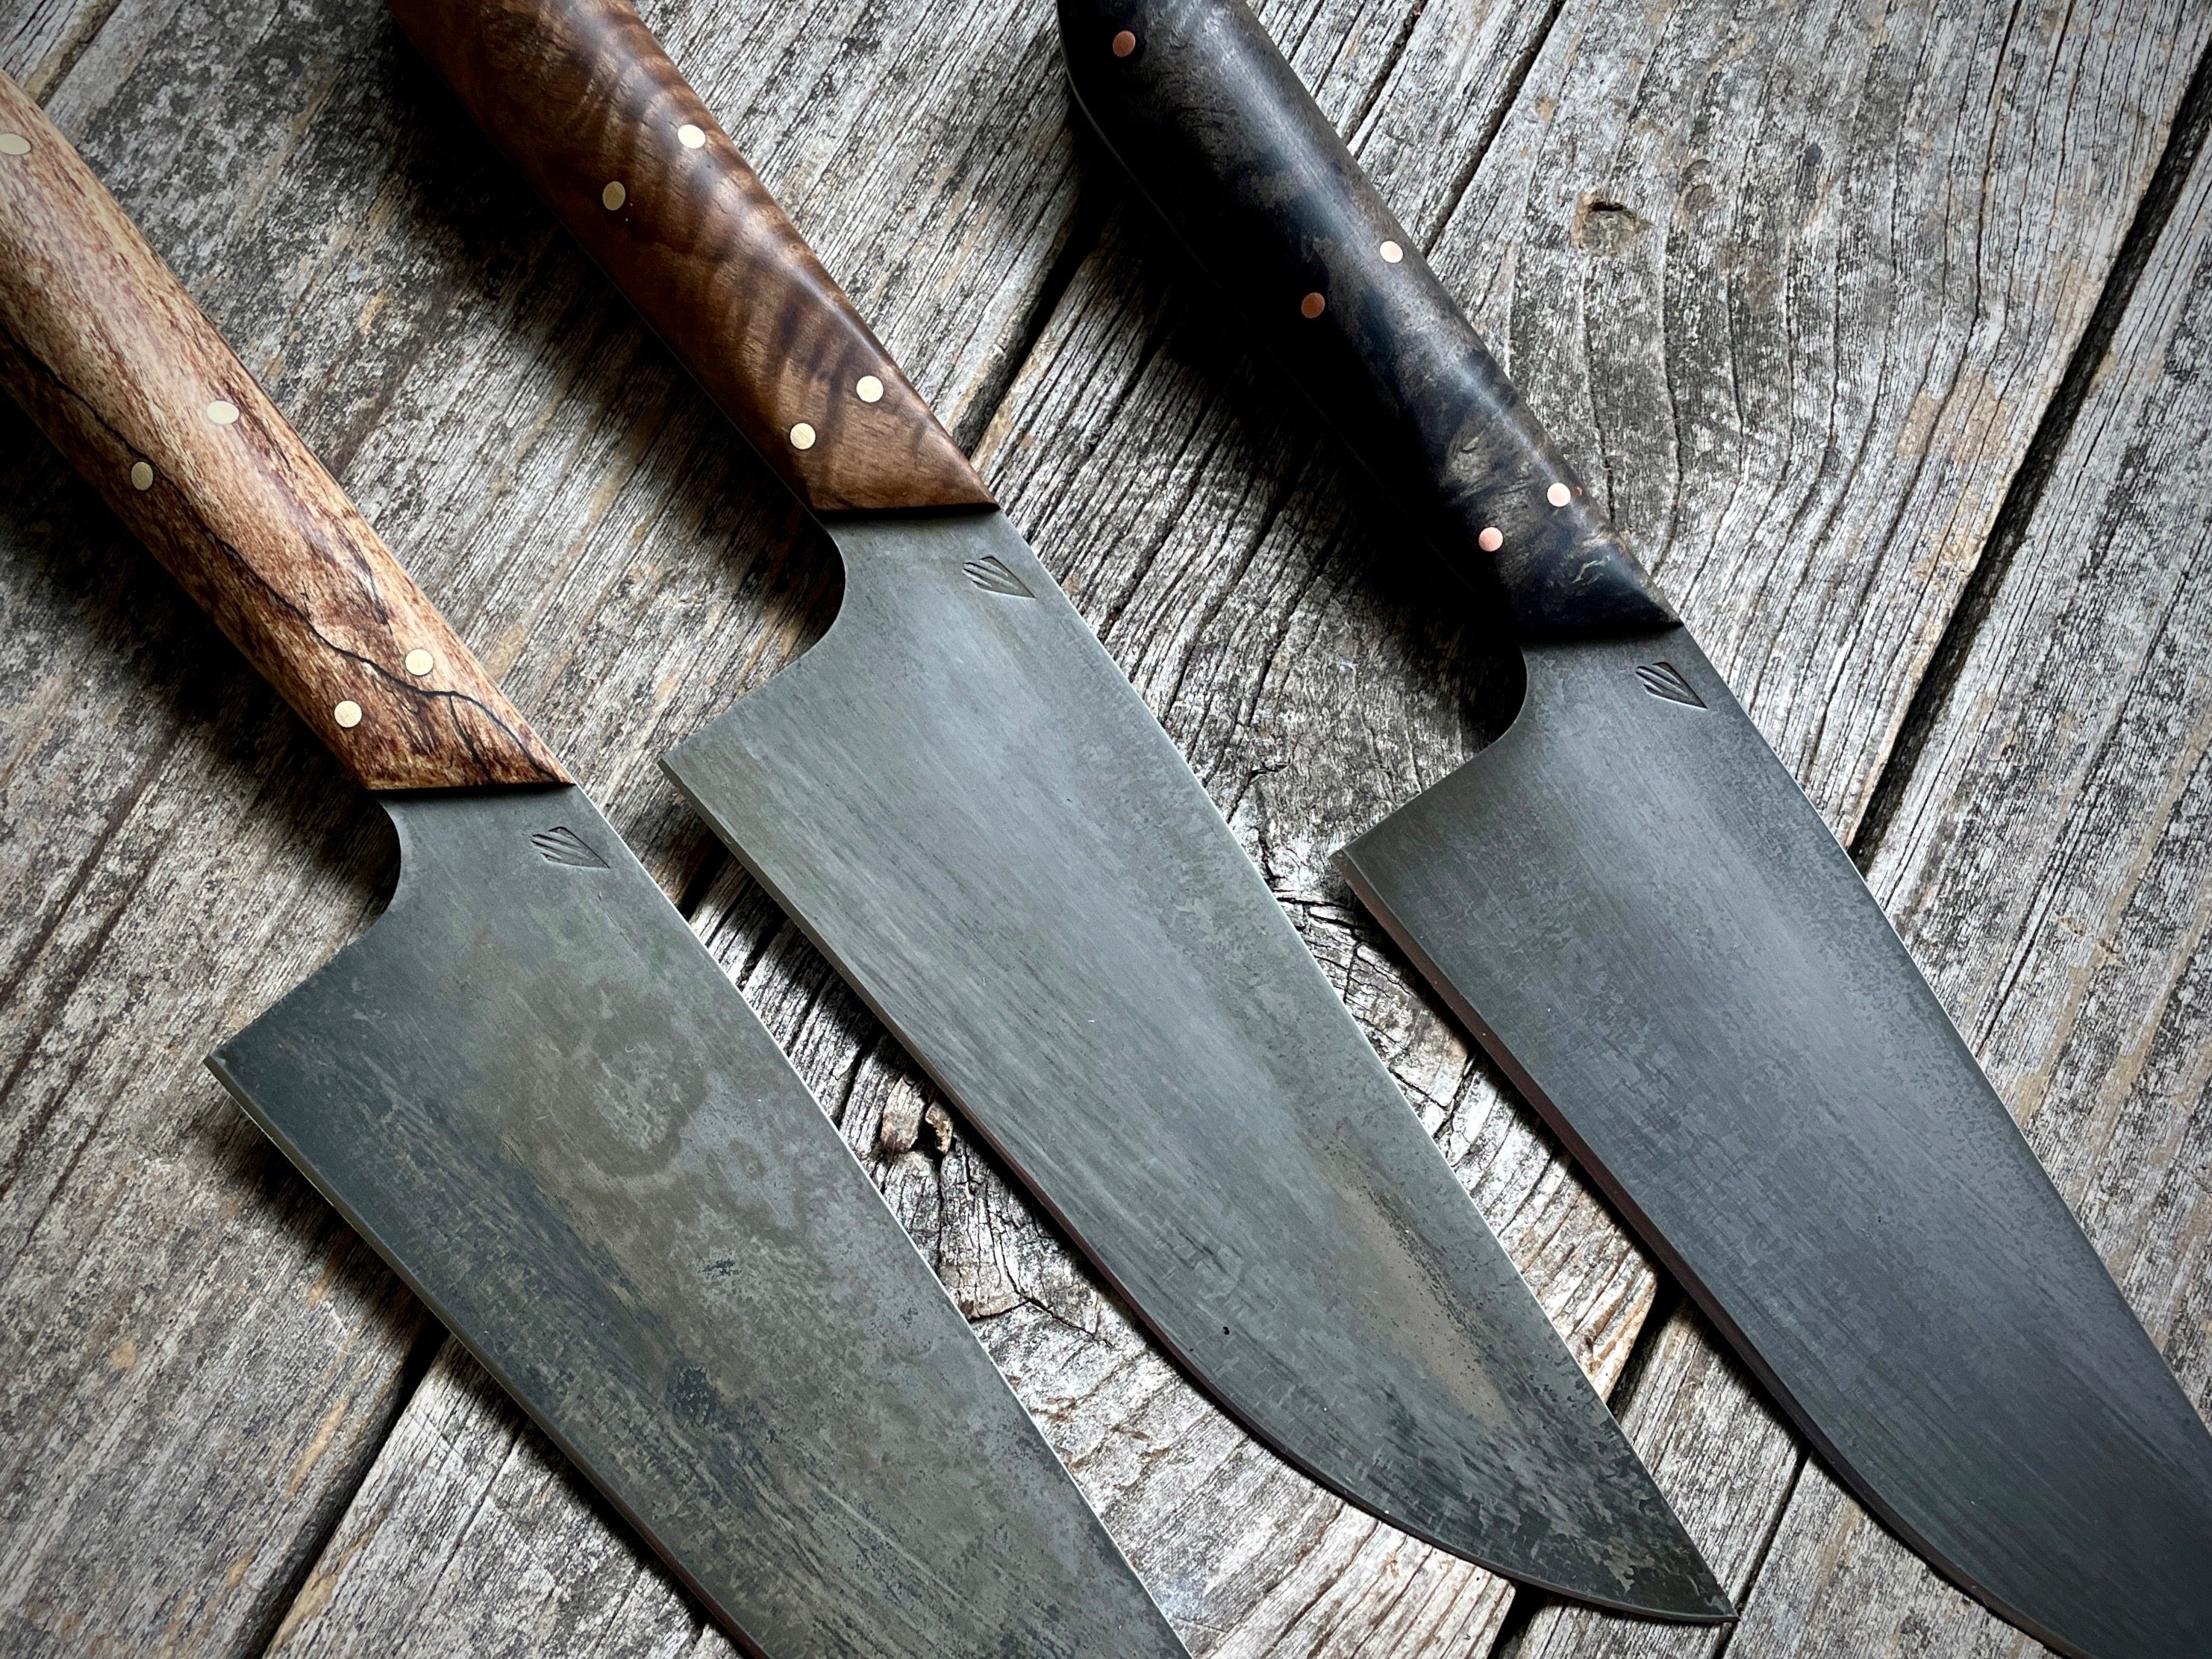 How to sharpen your knives at home - The Washington Post